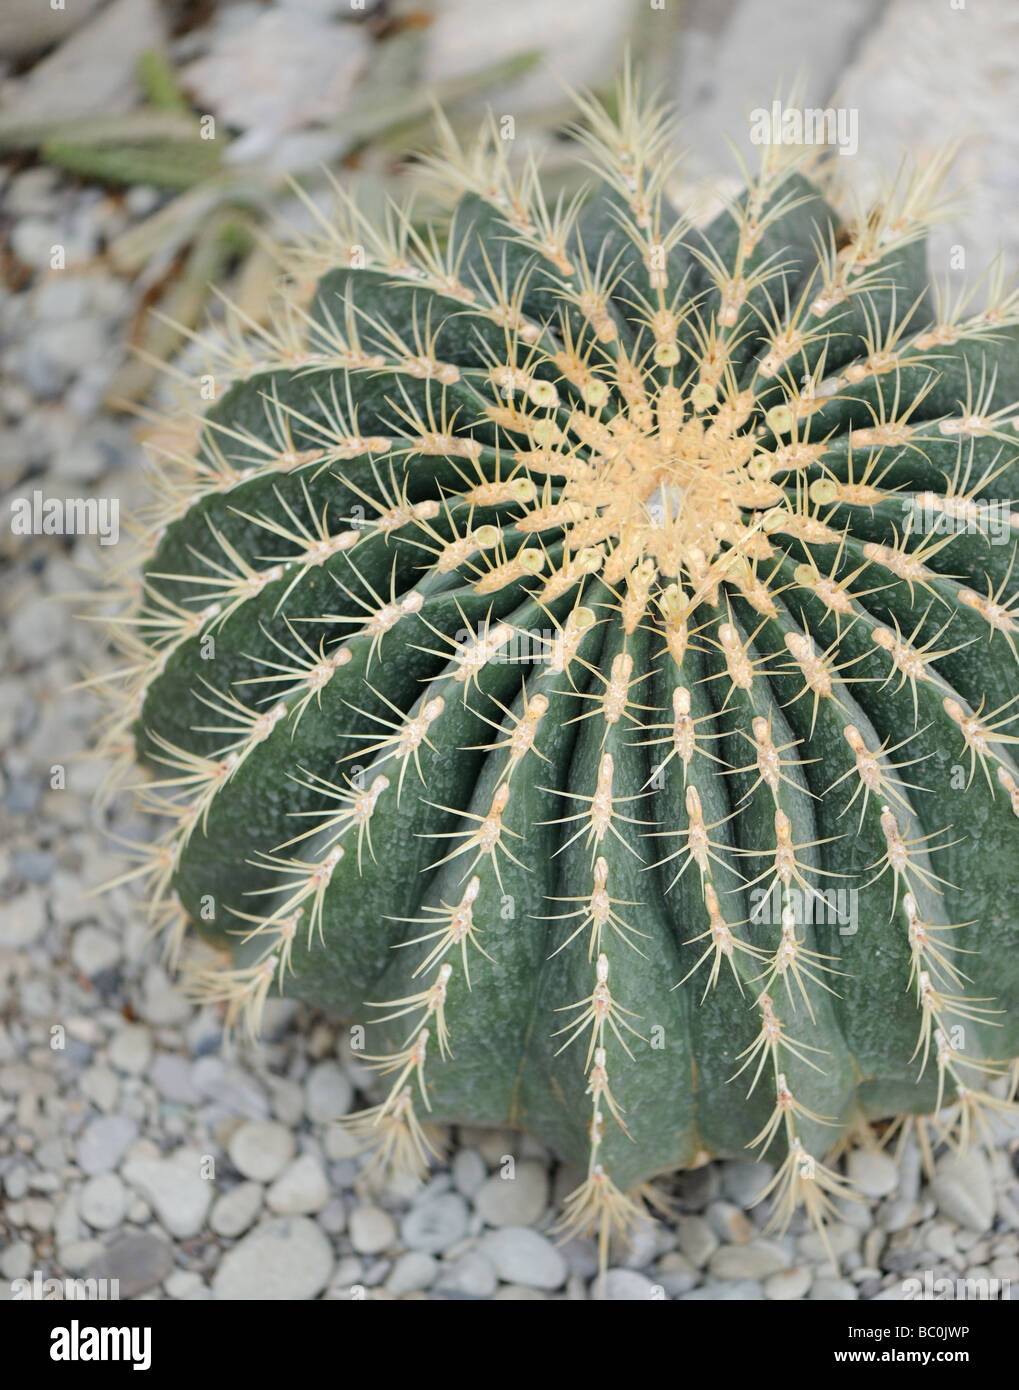 Cactus Type of spiny succulent plant Stock Photo